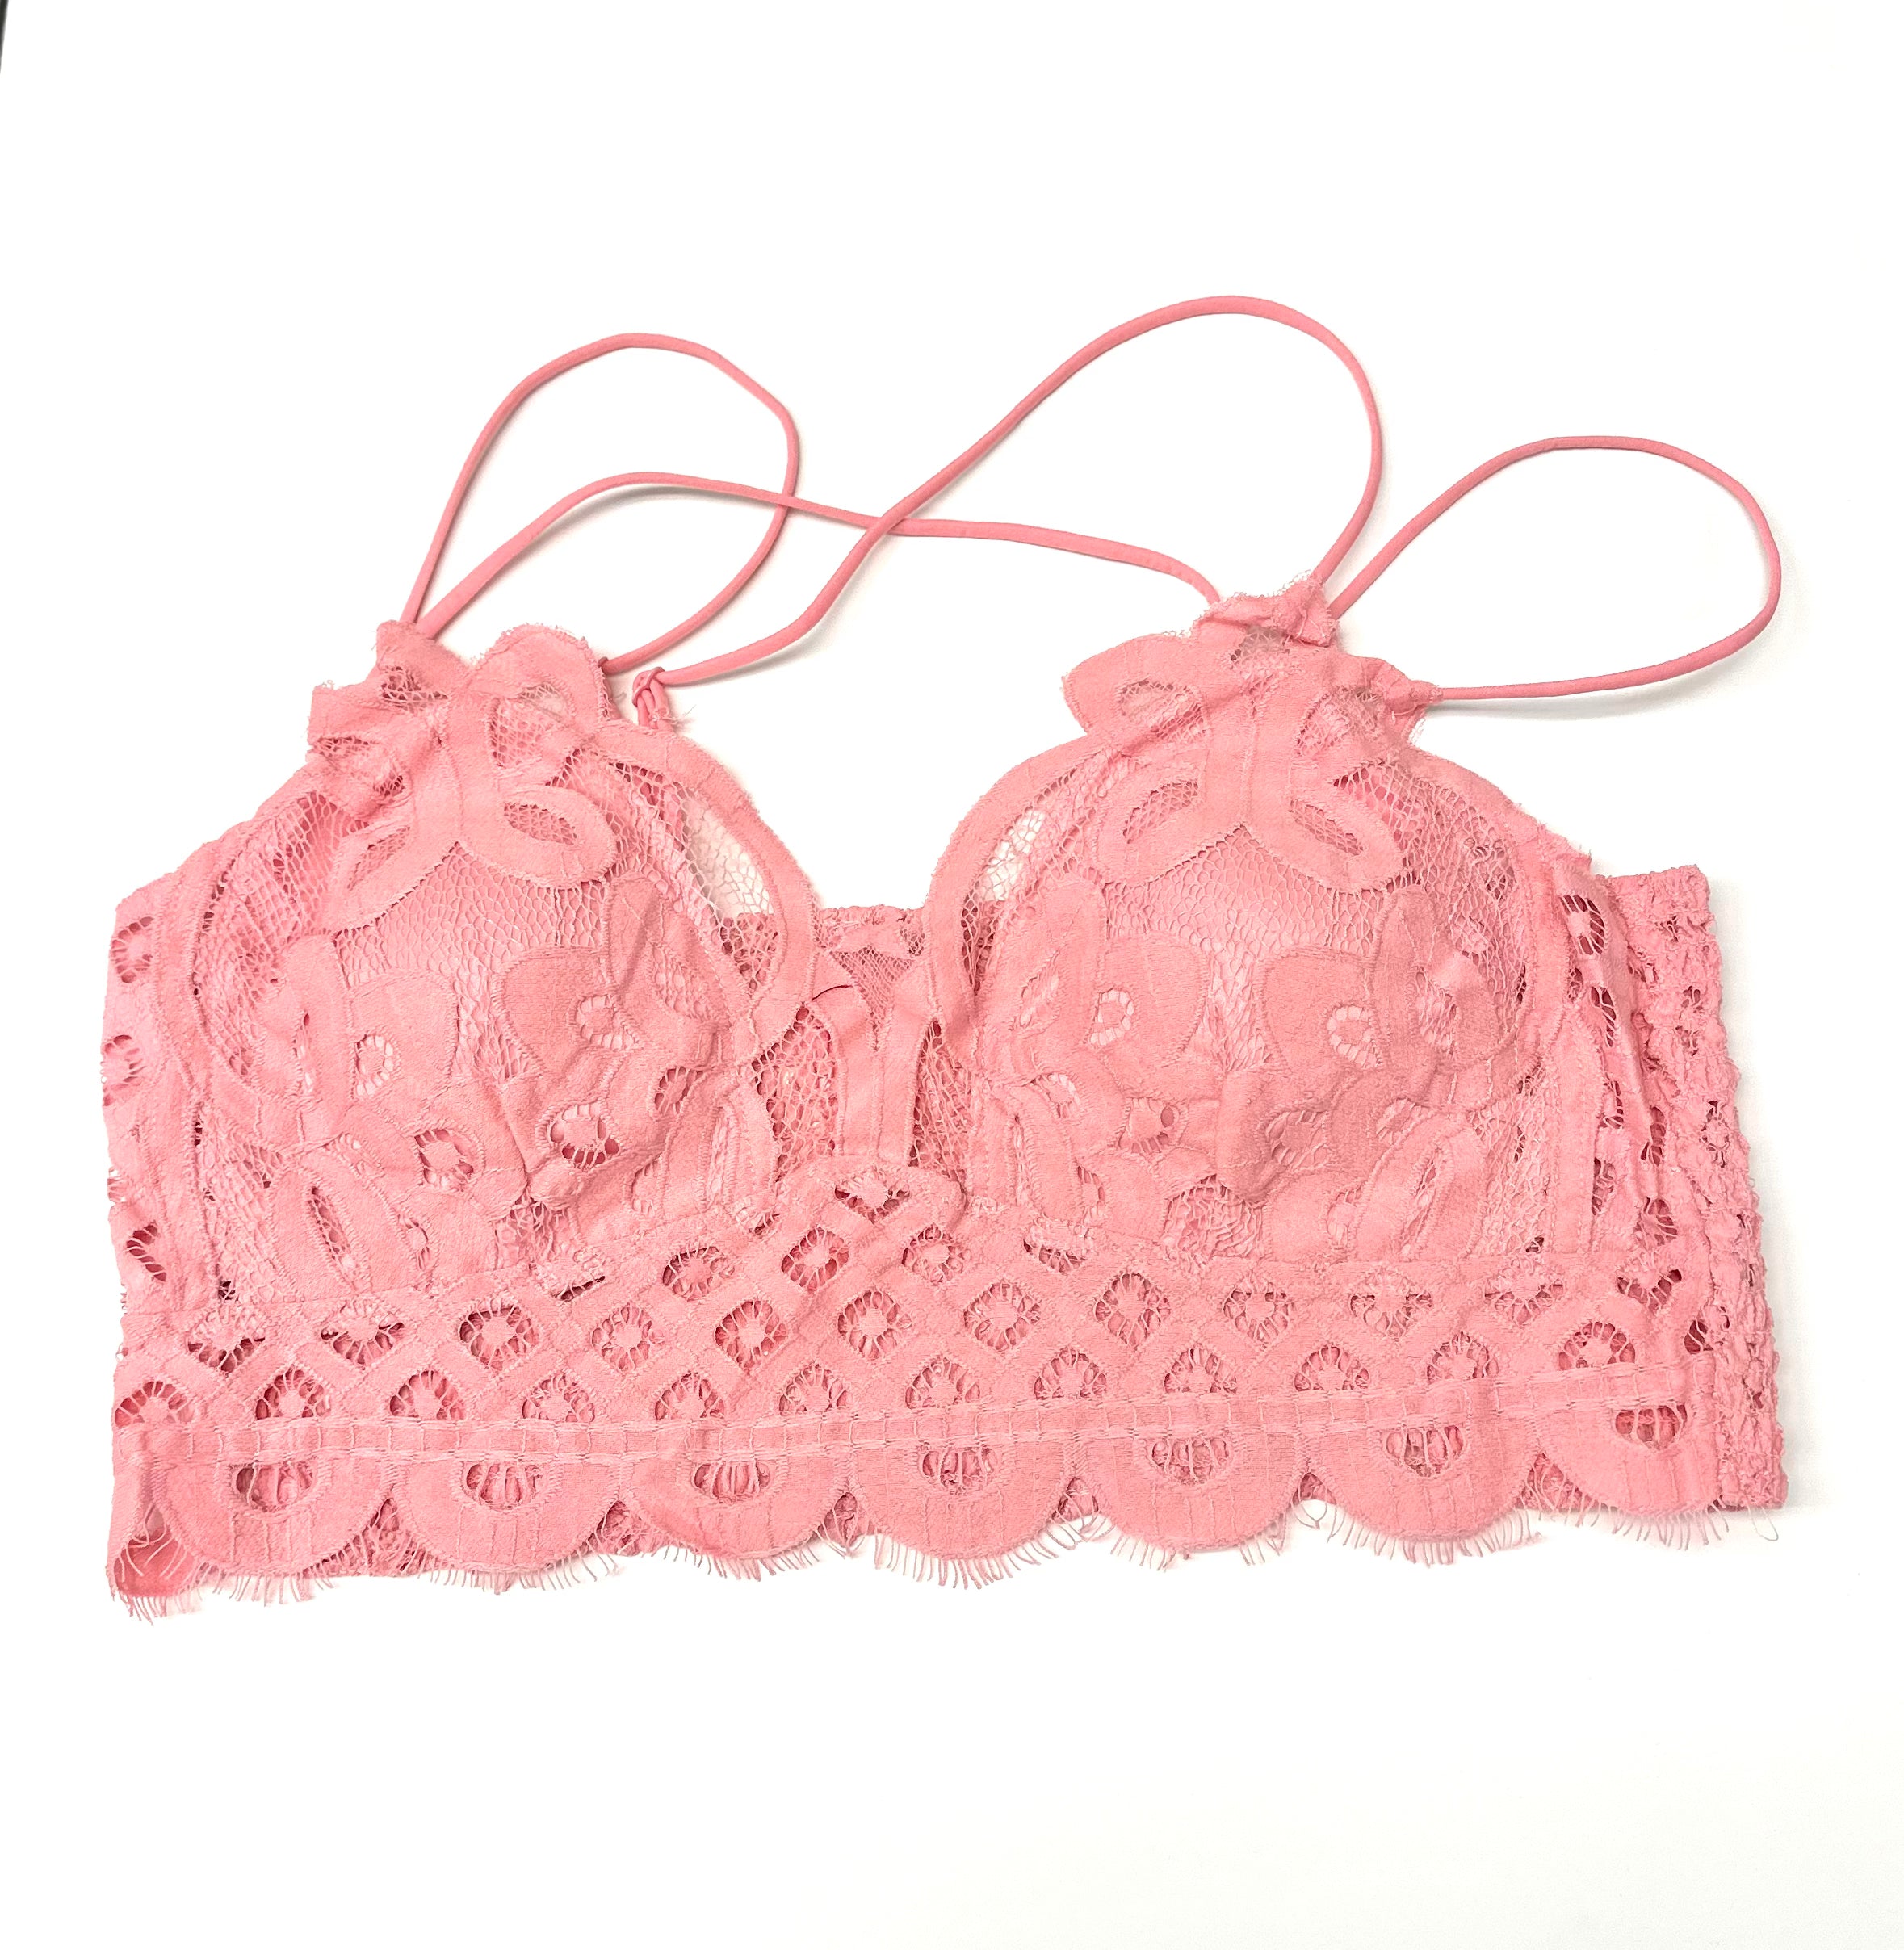 Crochet Lace Bralette with Pads